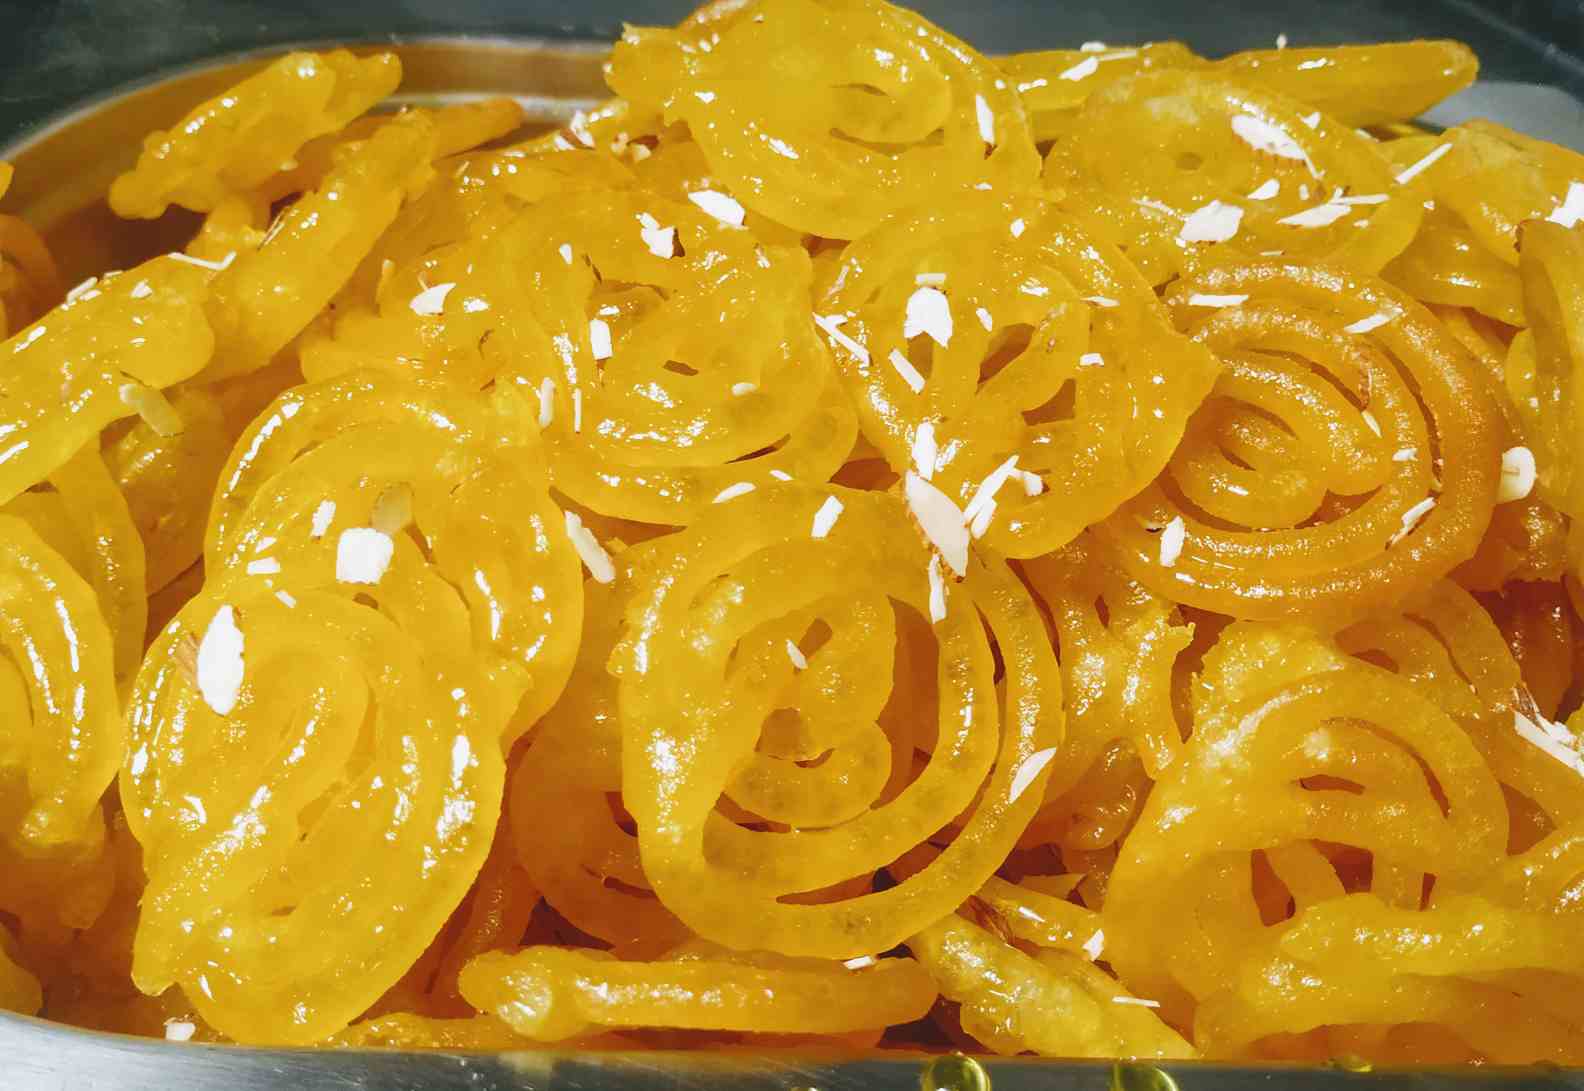 Are you also fond of eating Jalebi? So you will be shocked to know its history